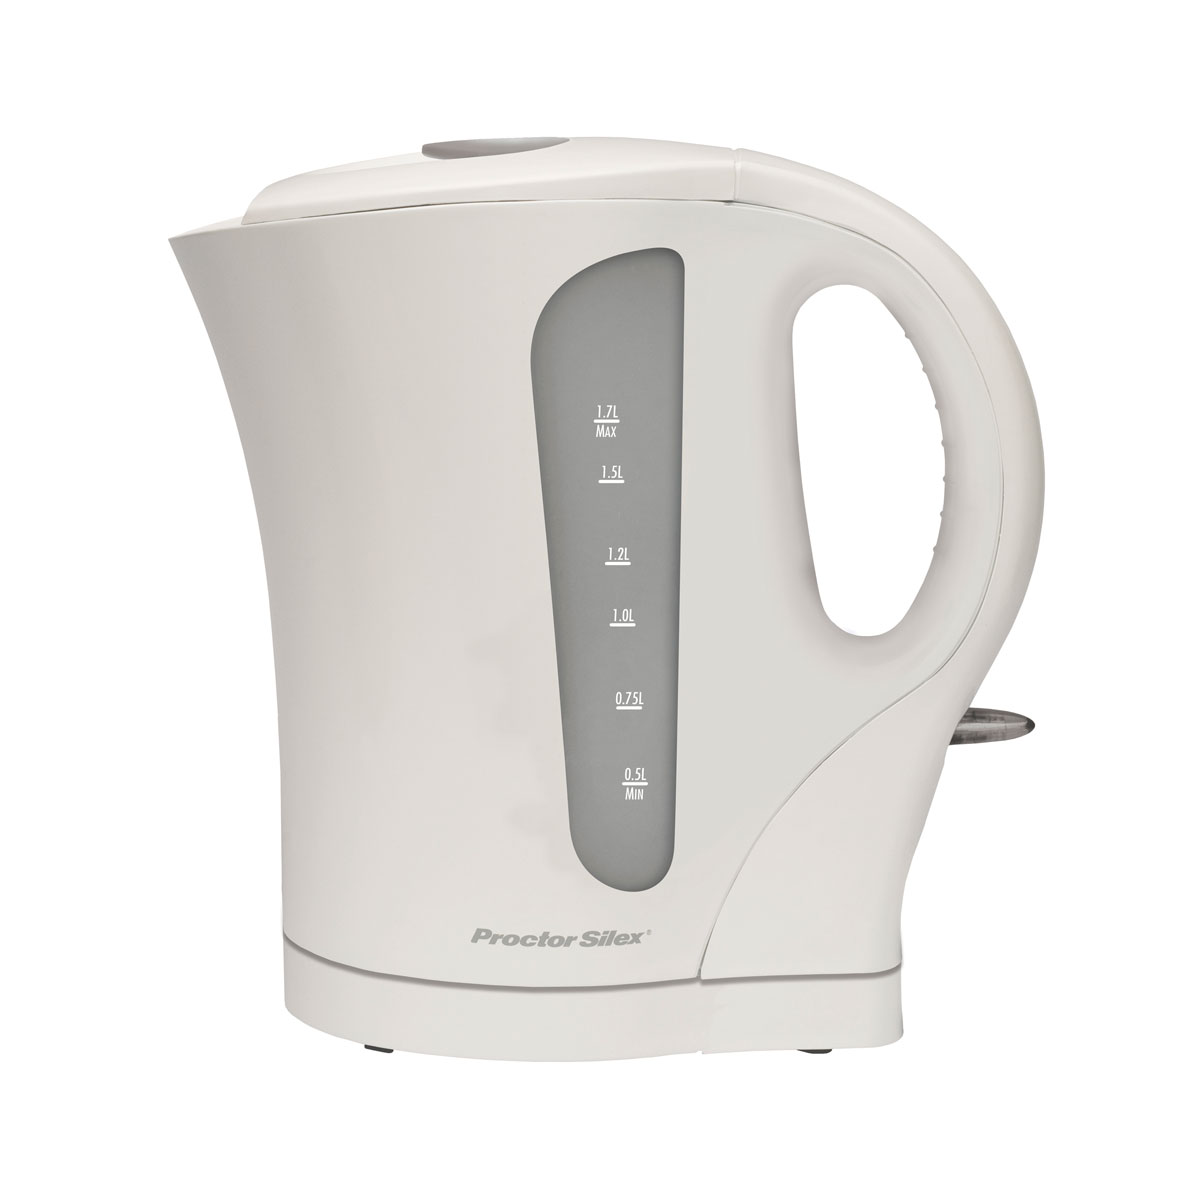 1.7 Litre Cordless Electric Kettle (white)- K4090 Small Size